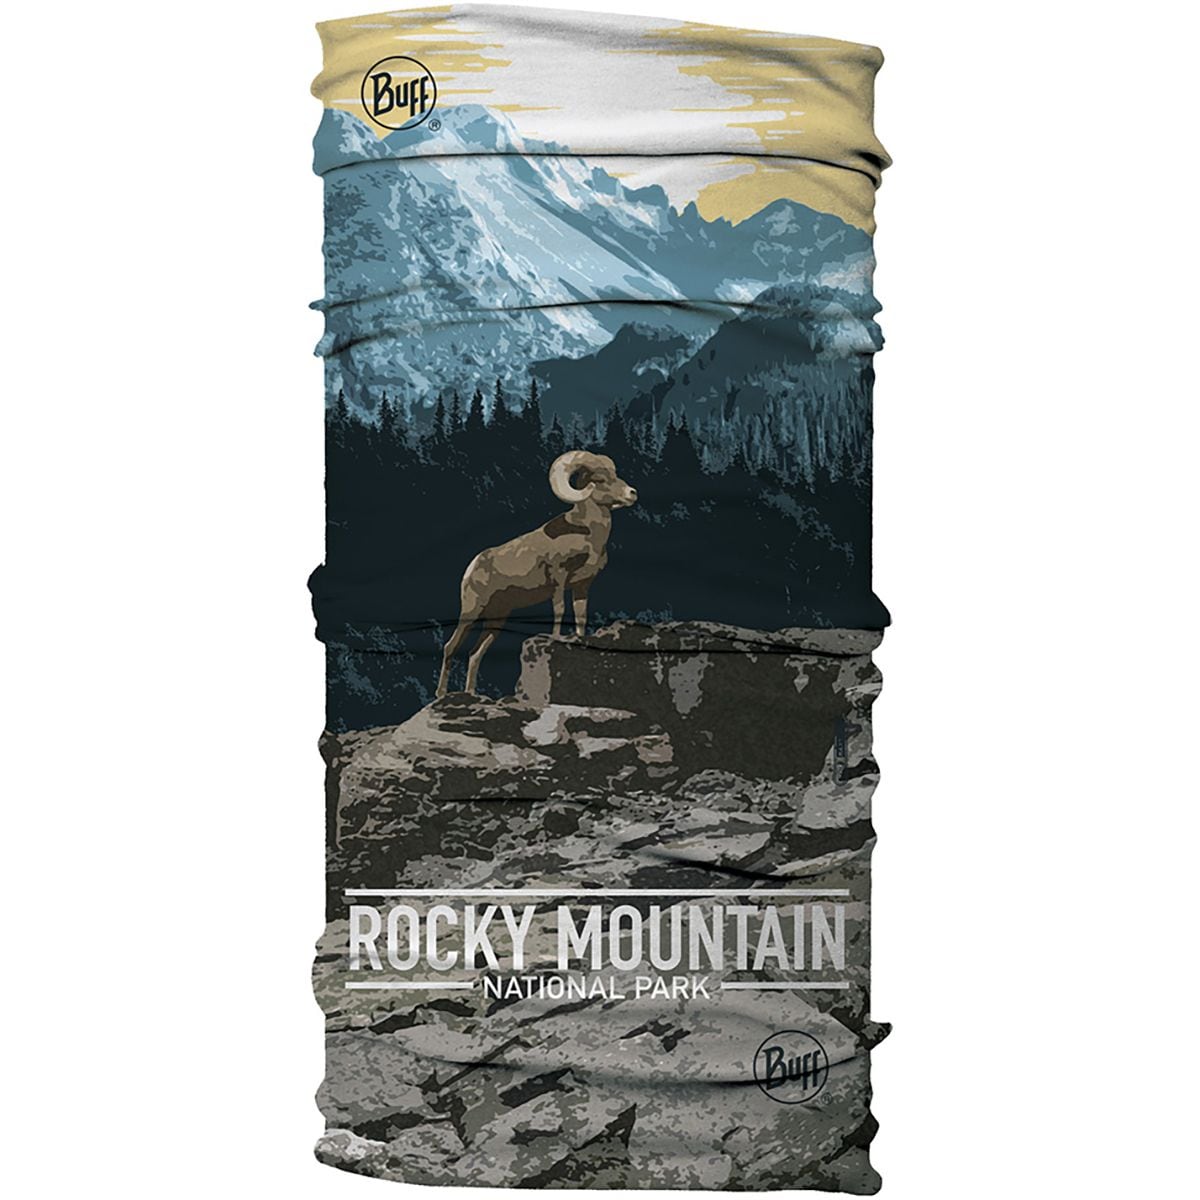 Buff CoolNet UV+ National Parks Collection Buff